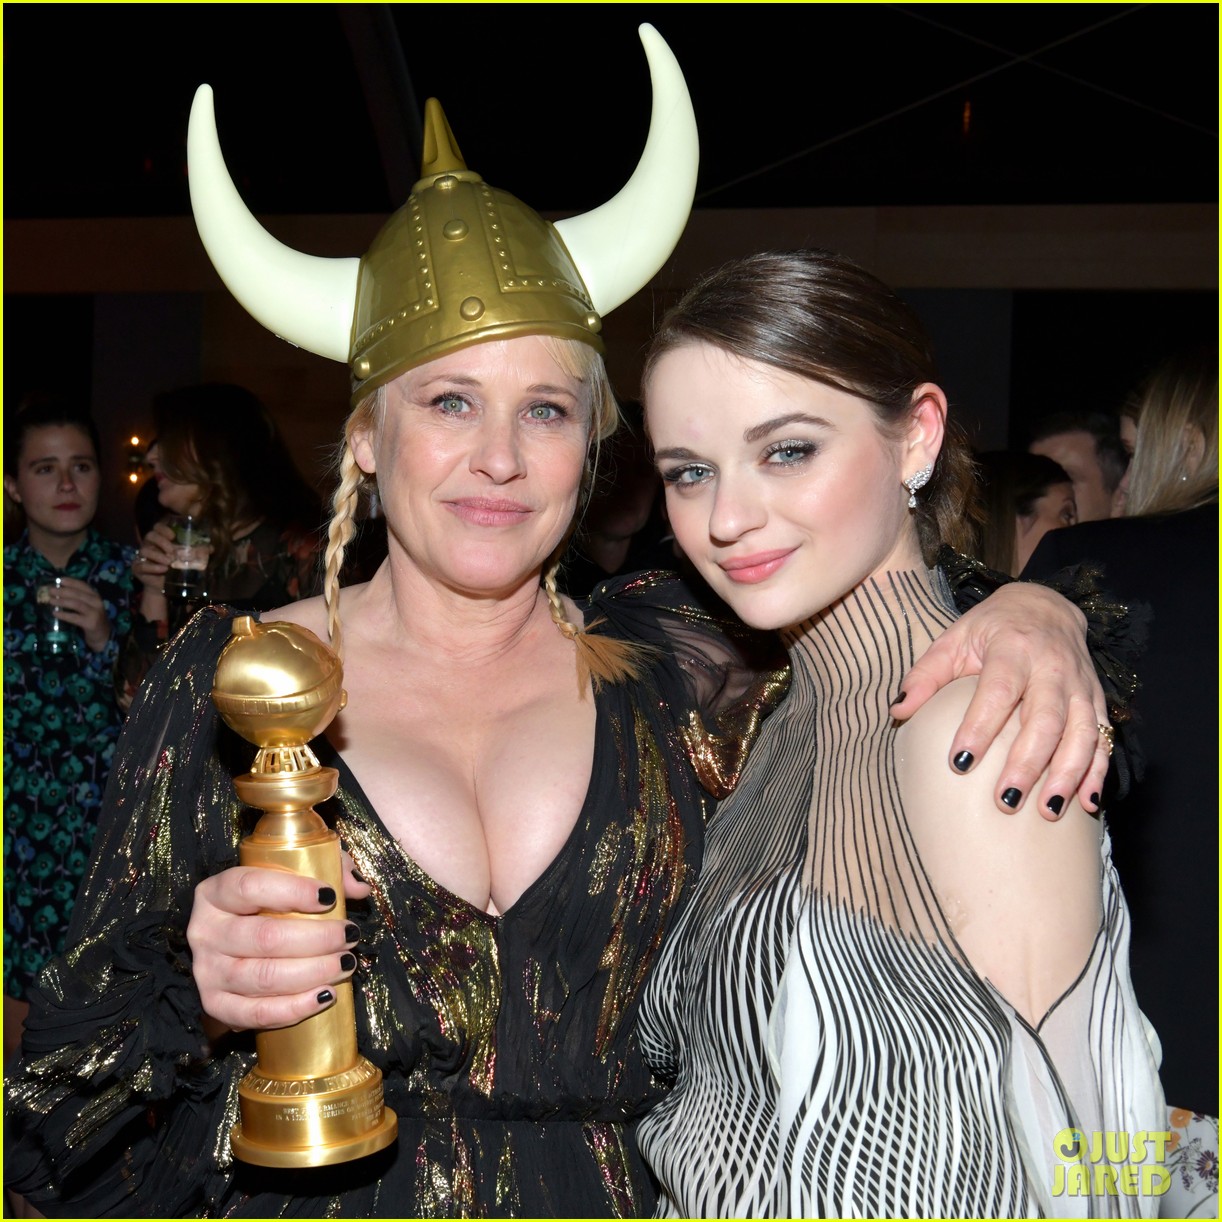 joey king reveals how patricia arquette gave her that bruise 02